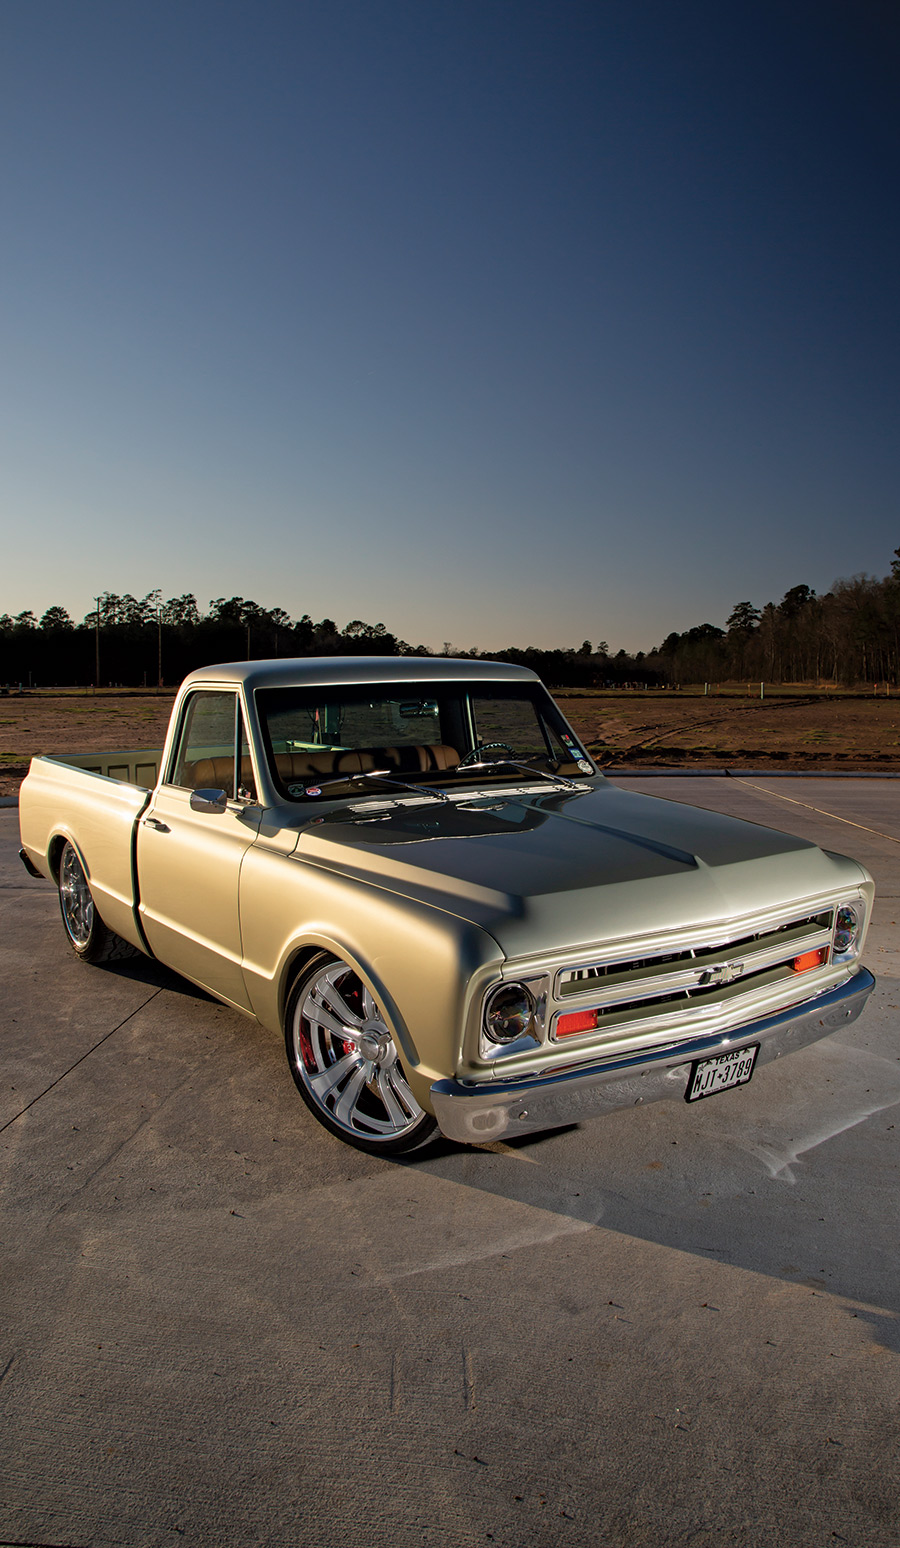 ’68 C10 front view during sunset